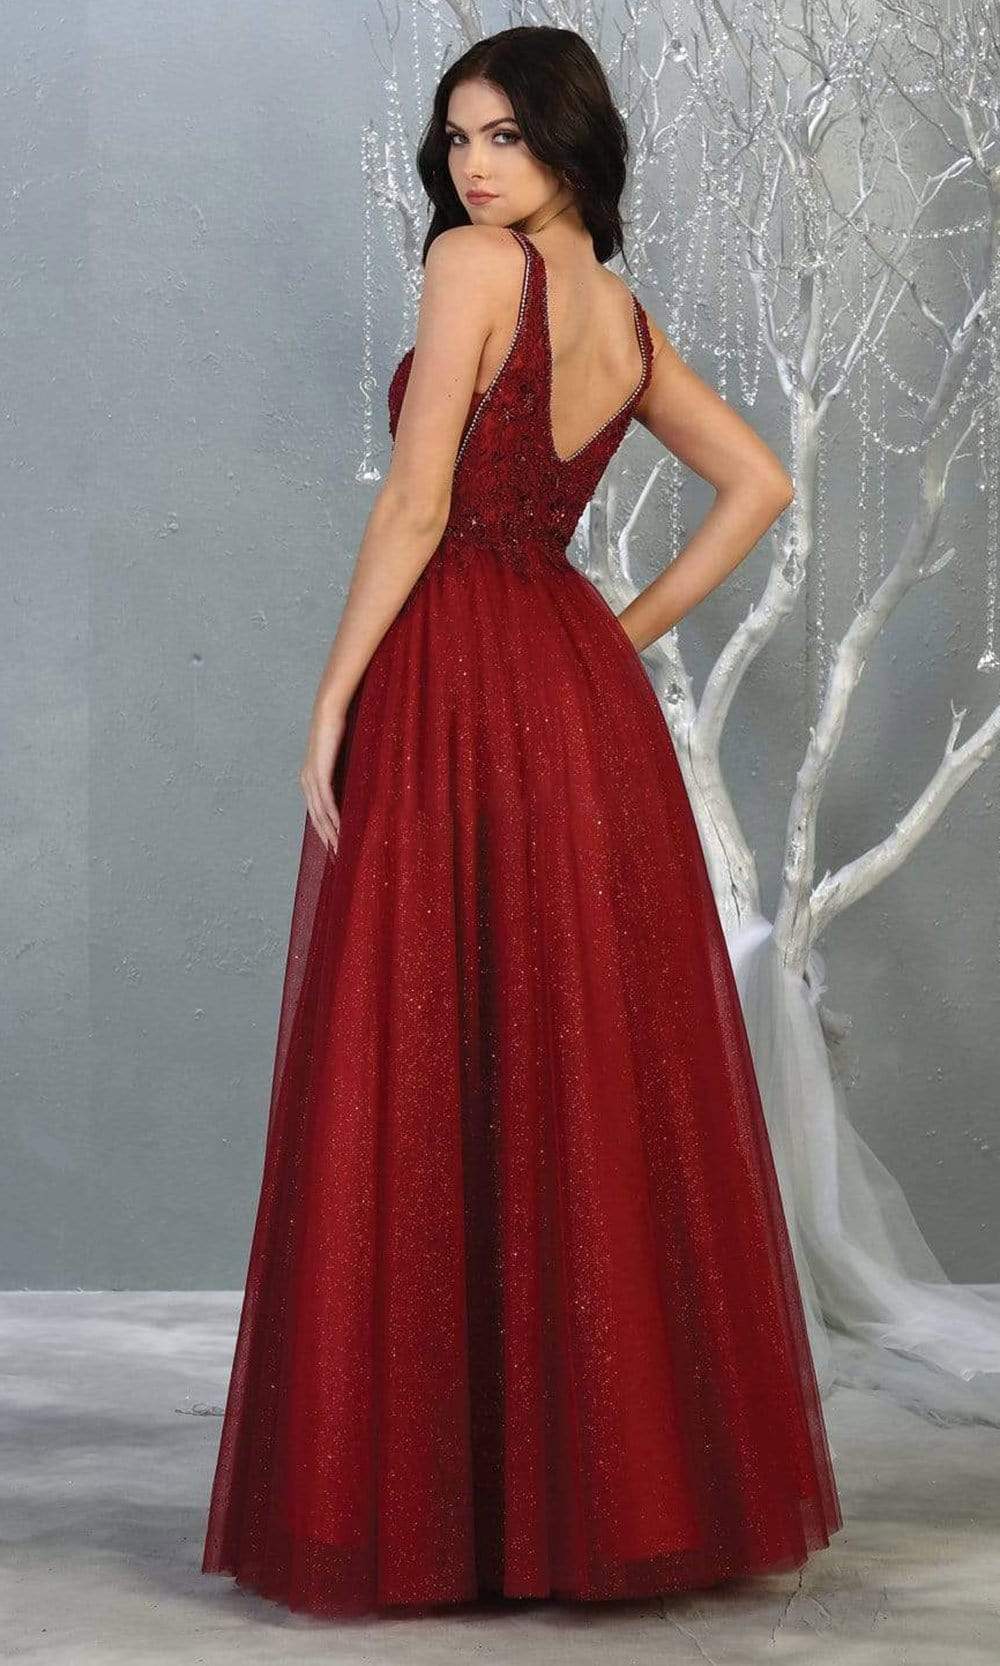 May Queen - MQ1786 Embroidered Applique Illusion A-Line Dress Prom Dresses